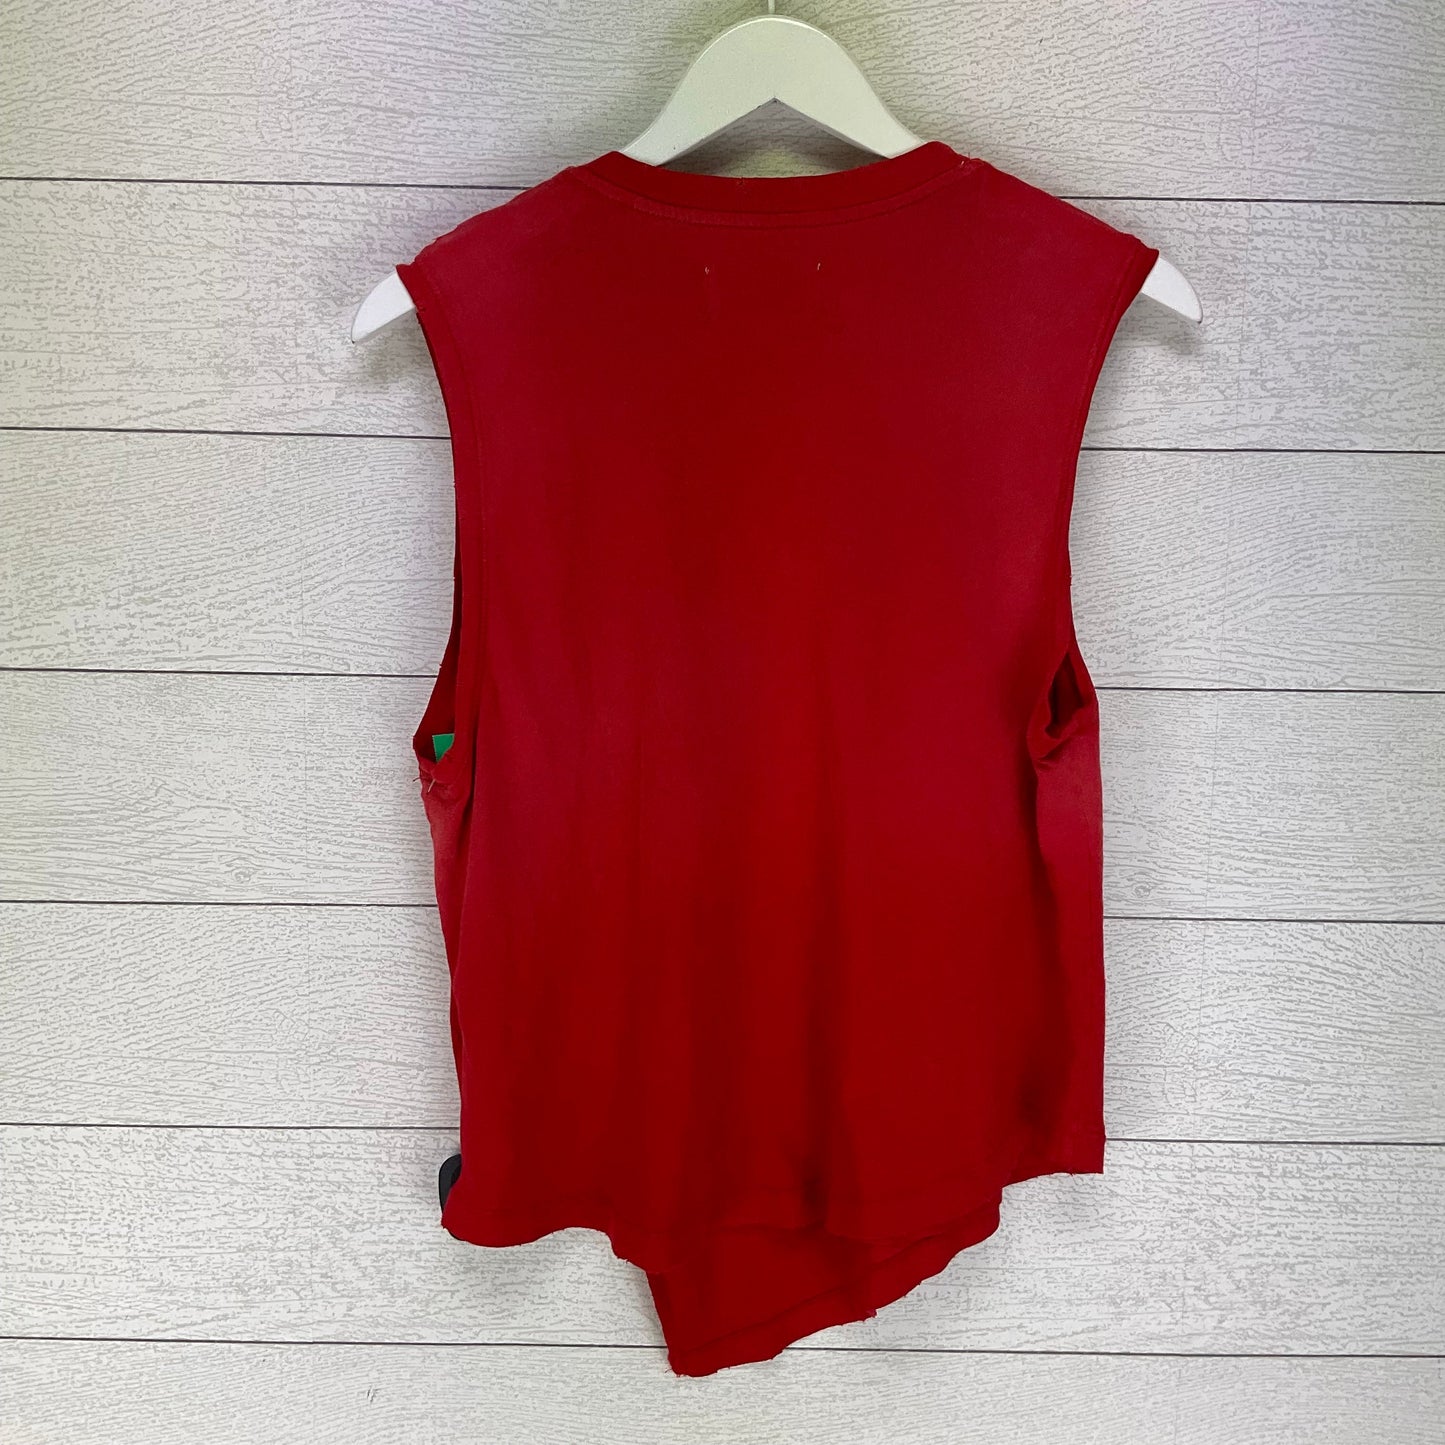 Top Sleeveless By Current Elliott  Size: M